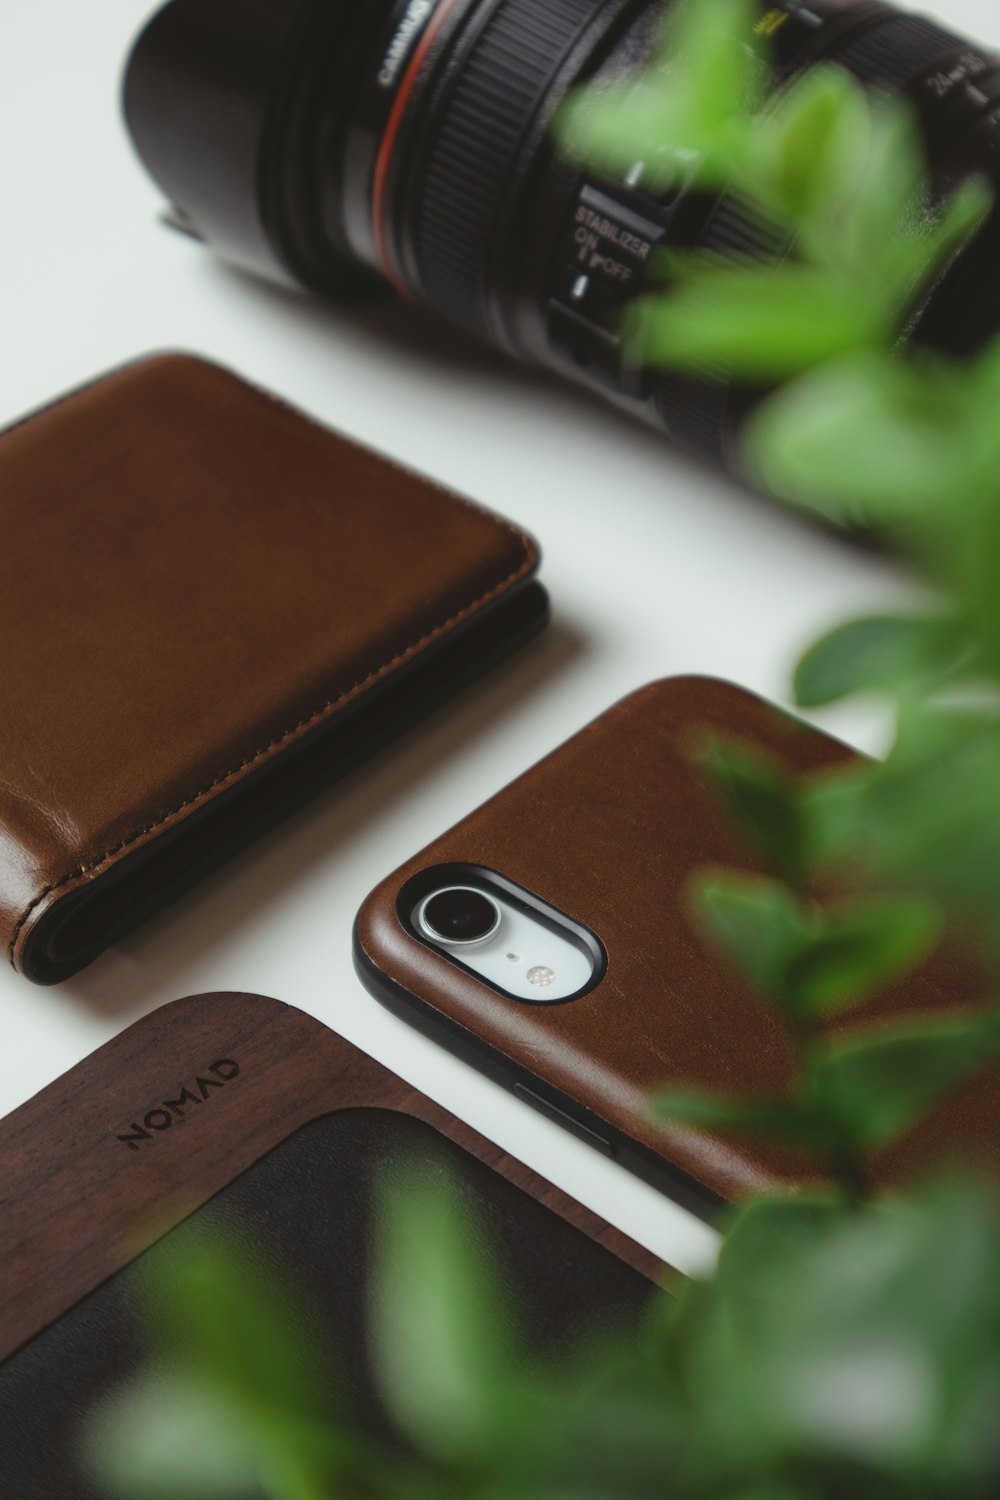 silver iphone 6 beside brown leather bifold wallet